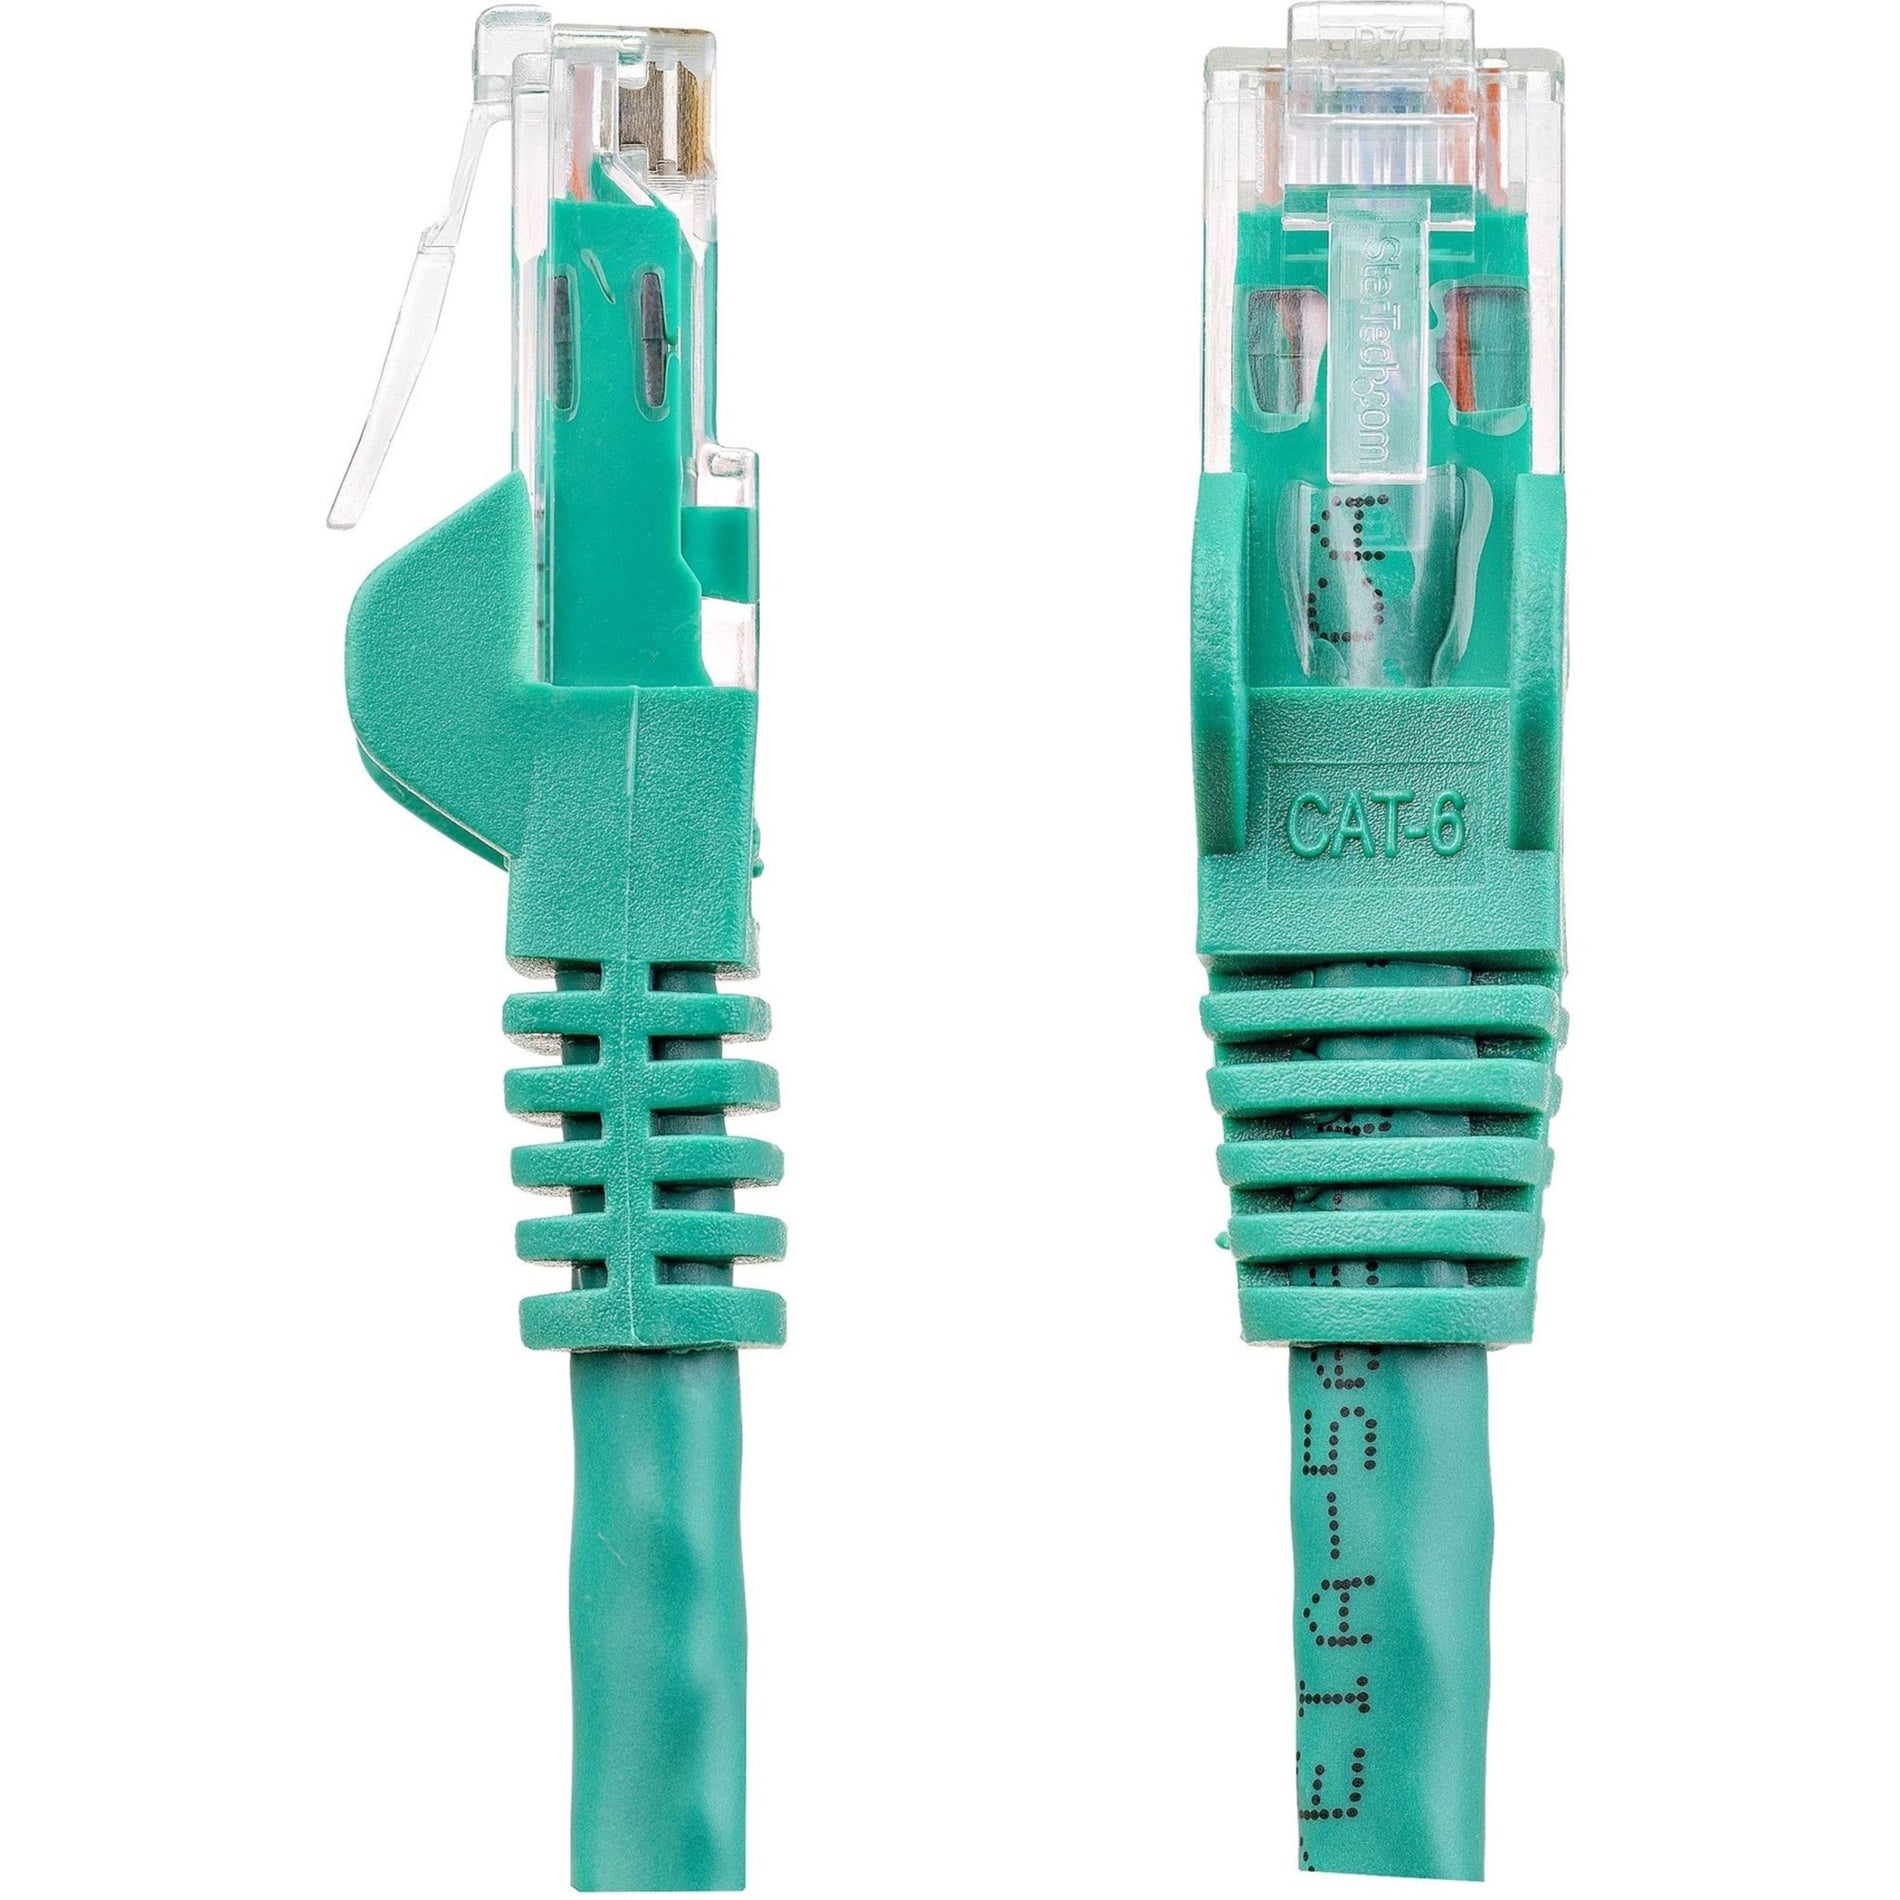 StarTech.com N6PATCH8GN Cat6 Cable, 8 ft Green Ethernet Cable, Snagless RJ45 Connectors